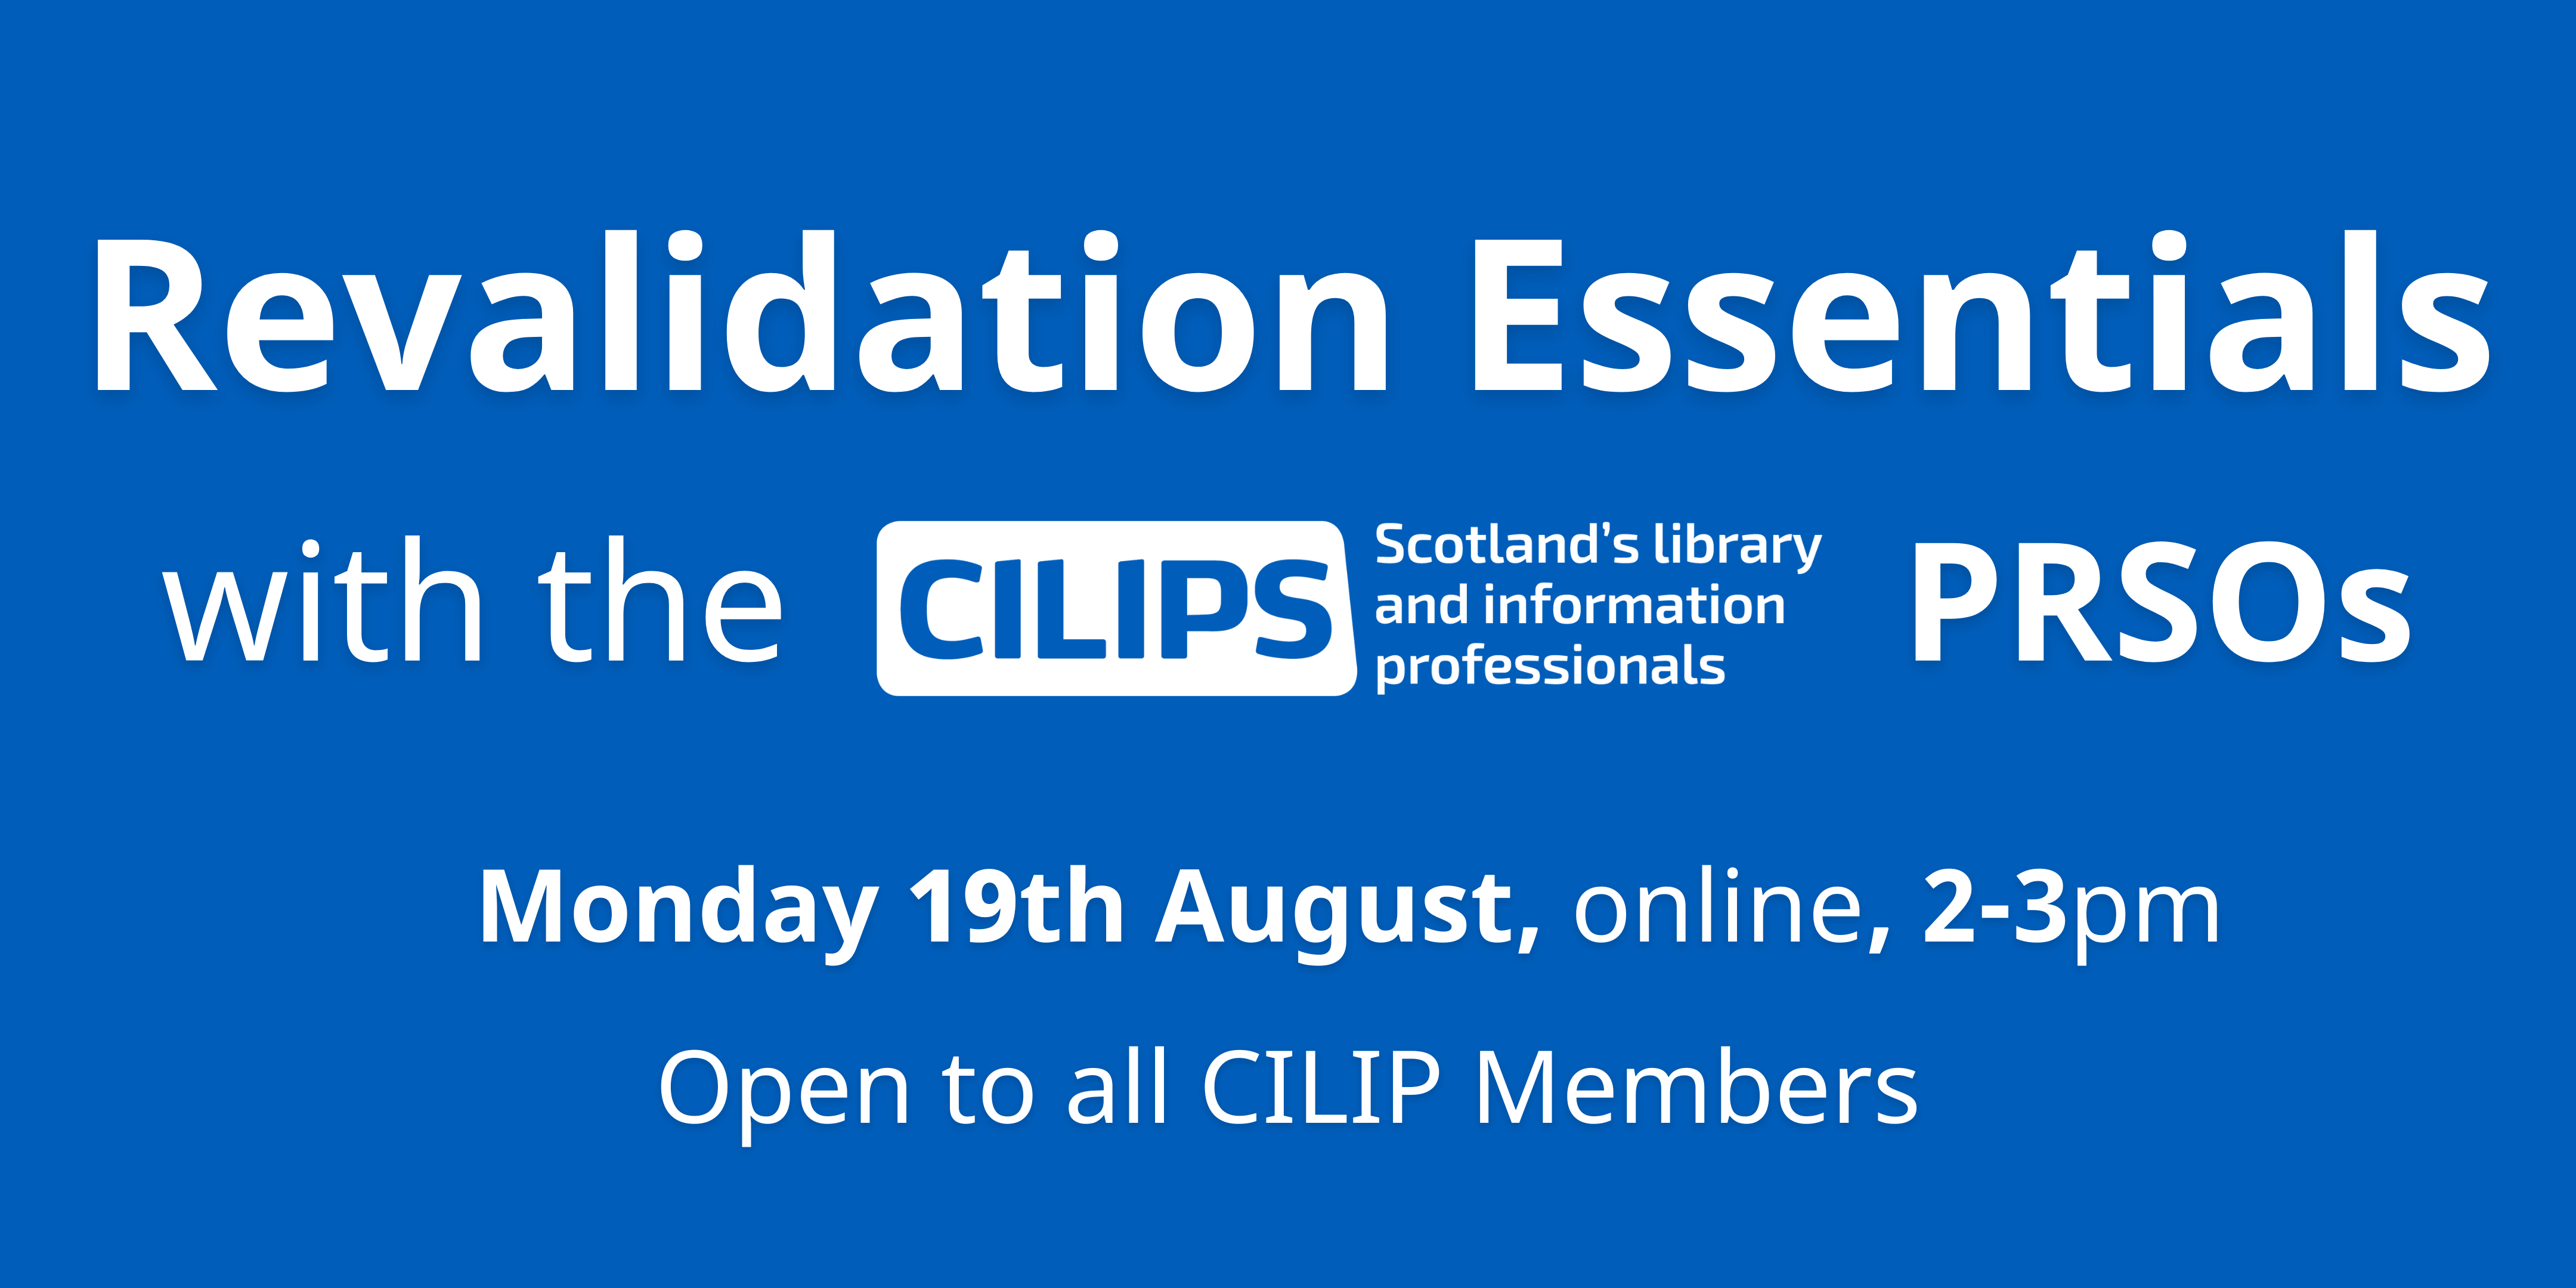 White text on a blue background. Reading "Revalidation essentials with the CILIPS PRSOs. Monday 19th August, online, 2-3pm, open to all CILIP Members.